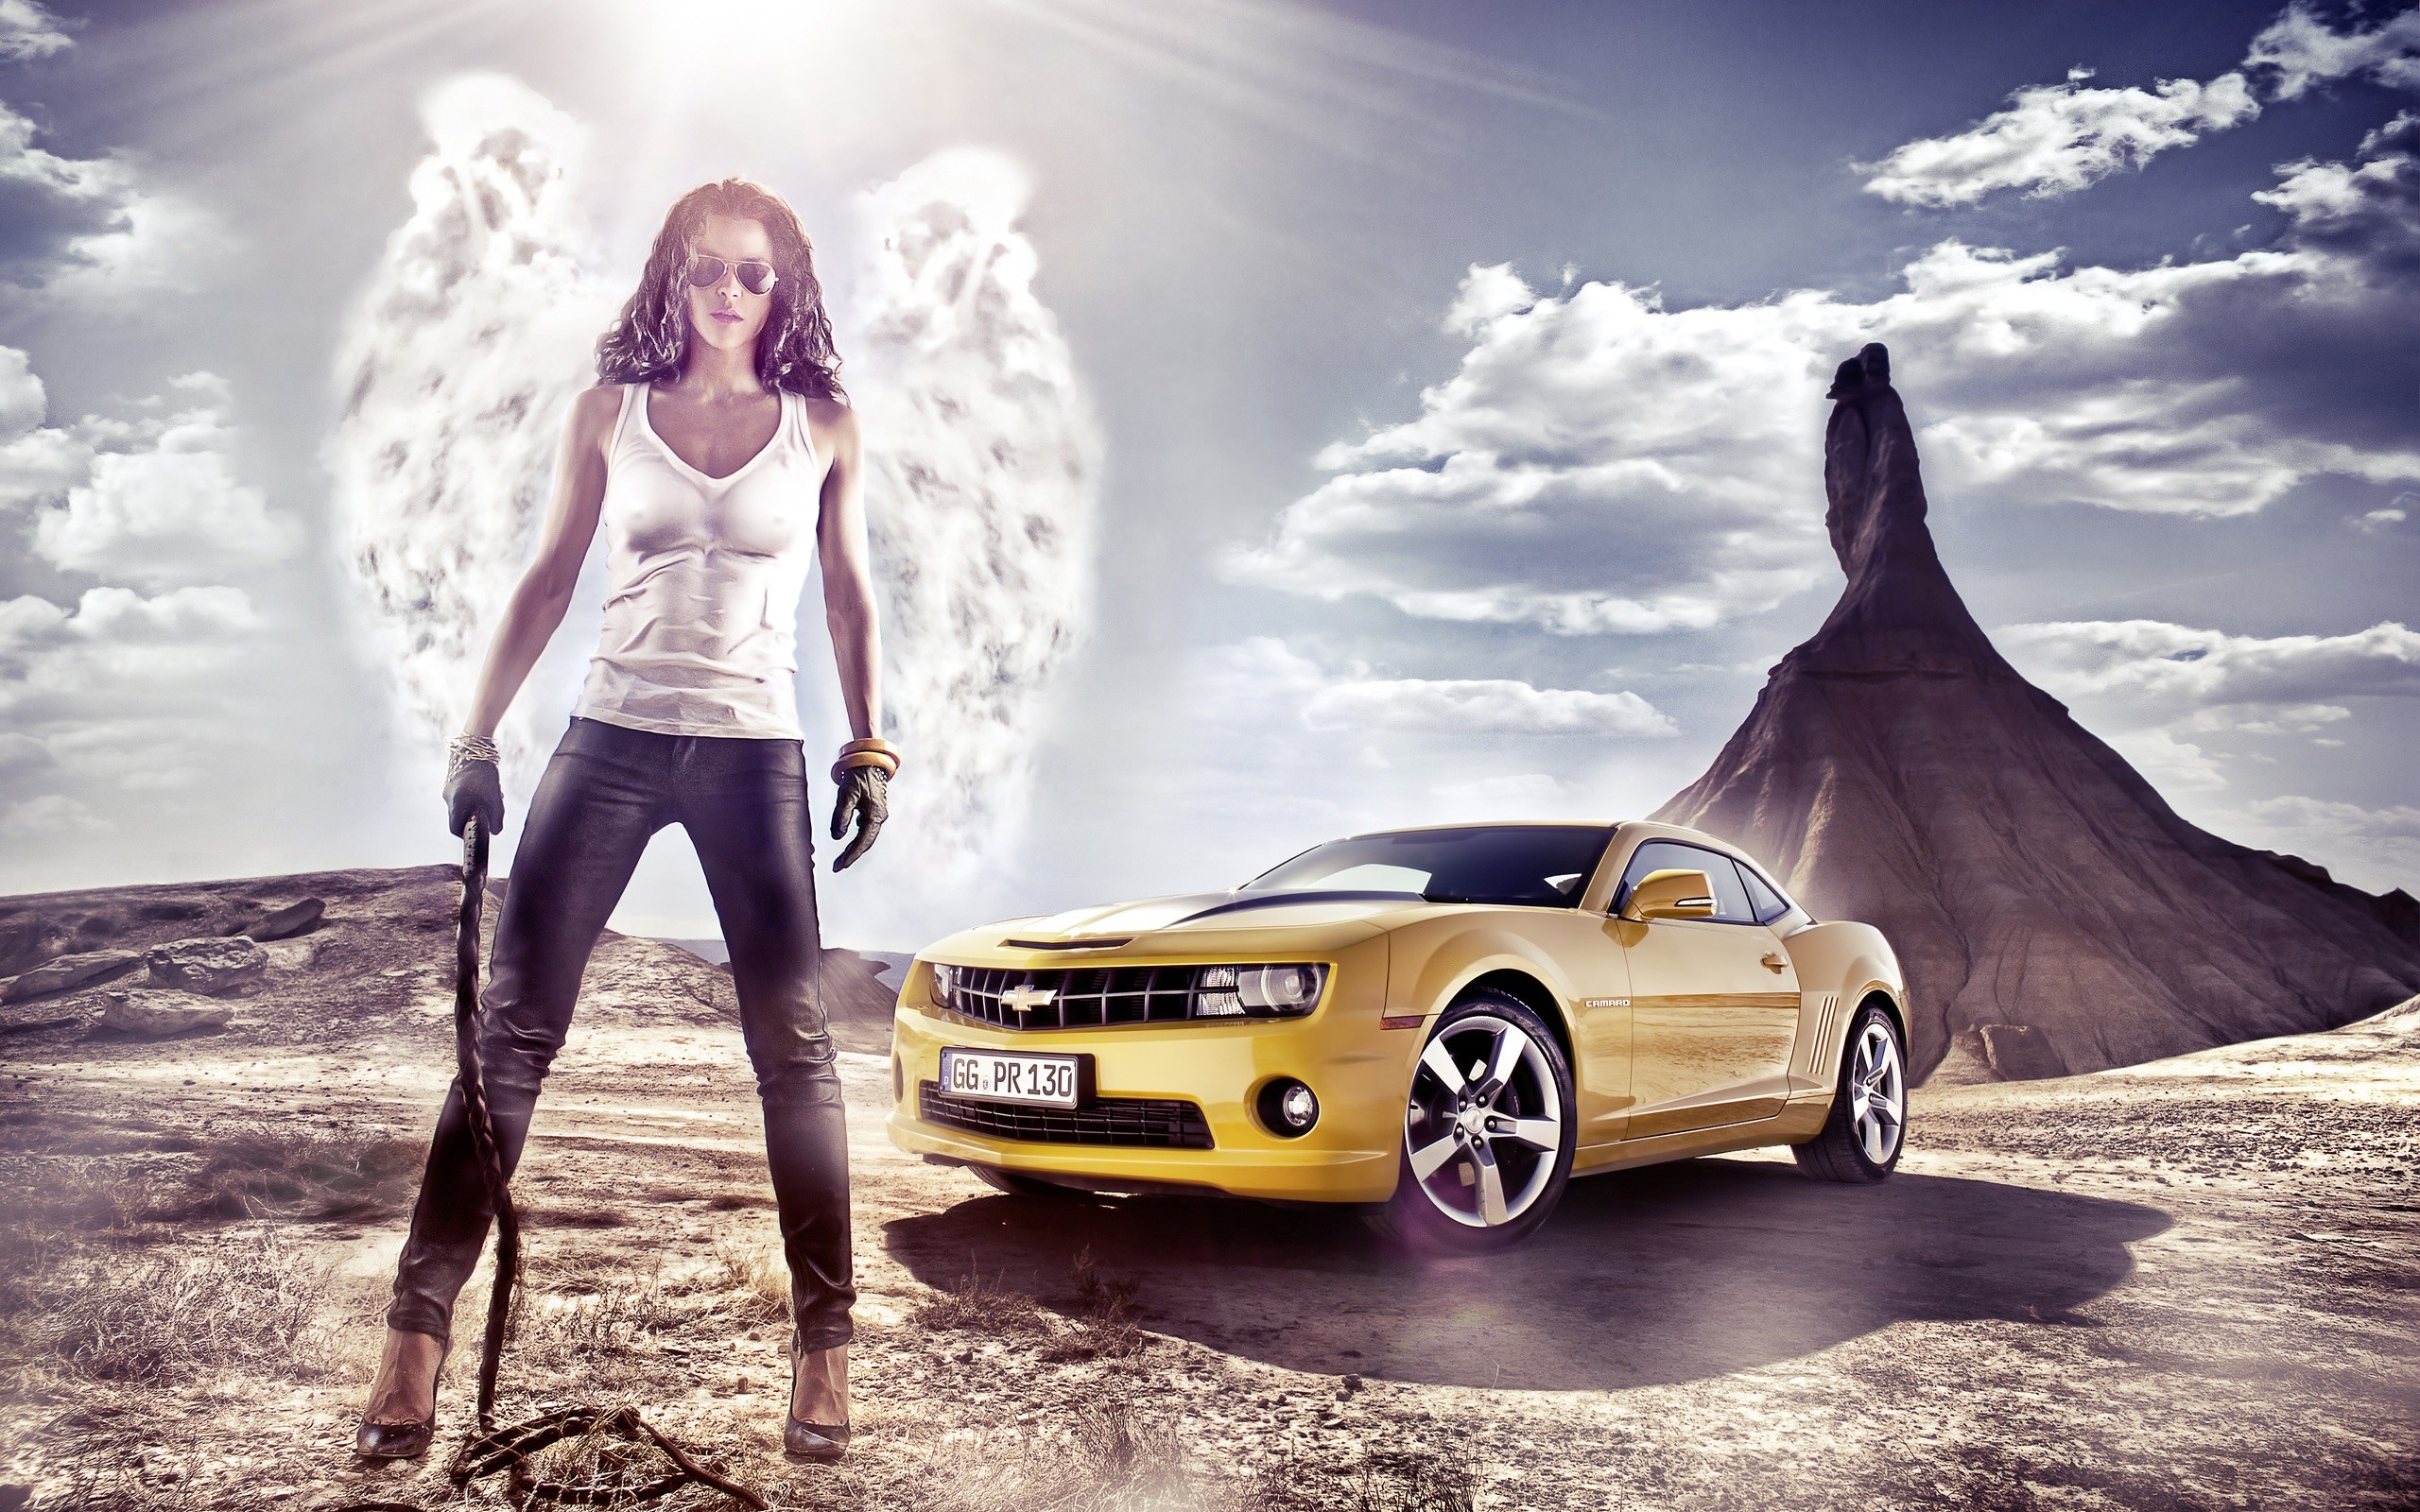 2560x1600 Home > Cars & Vehicules > Cars > Car Girl Backgrounds